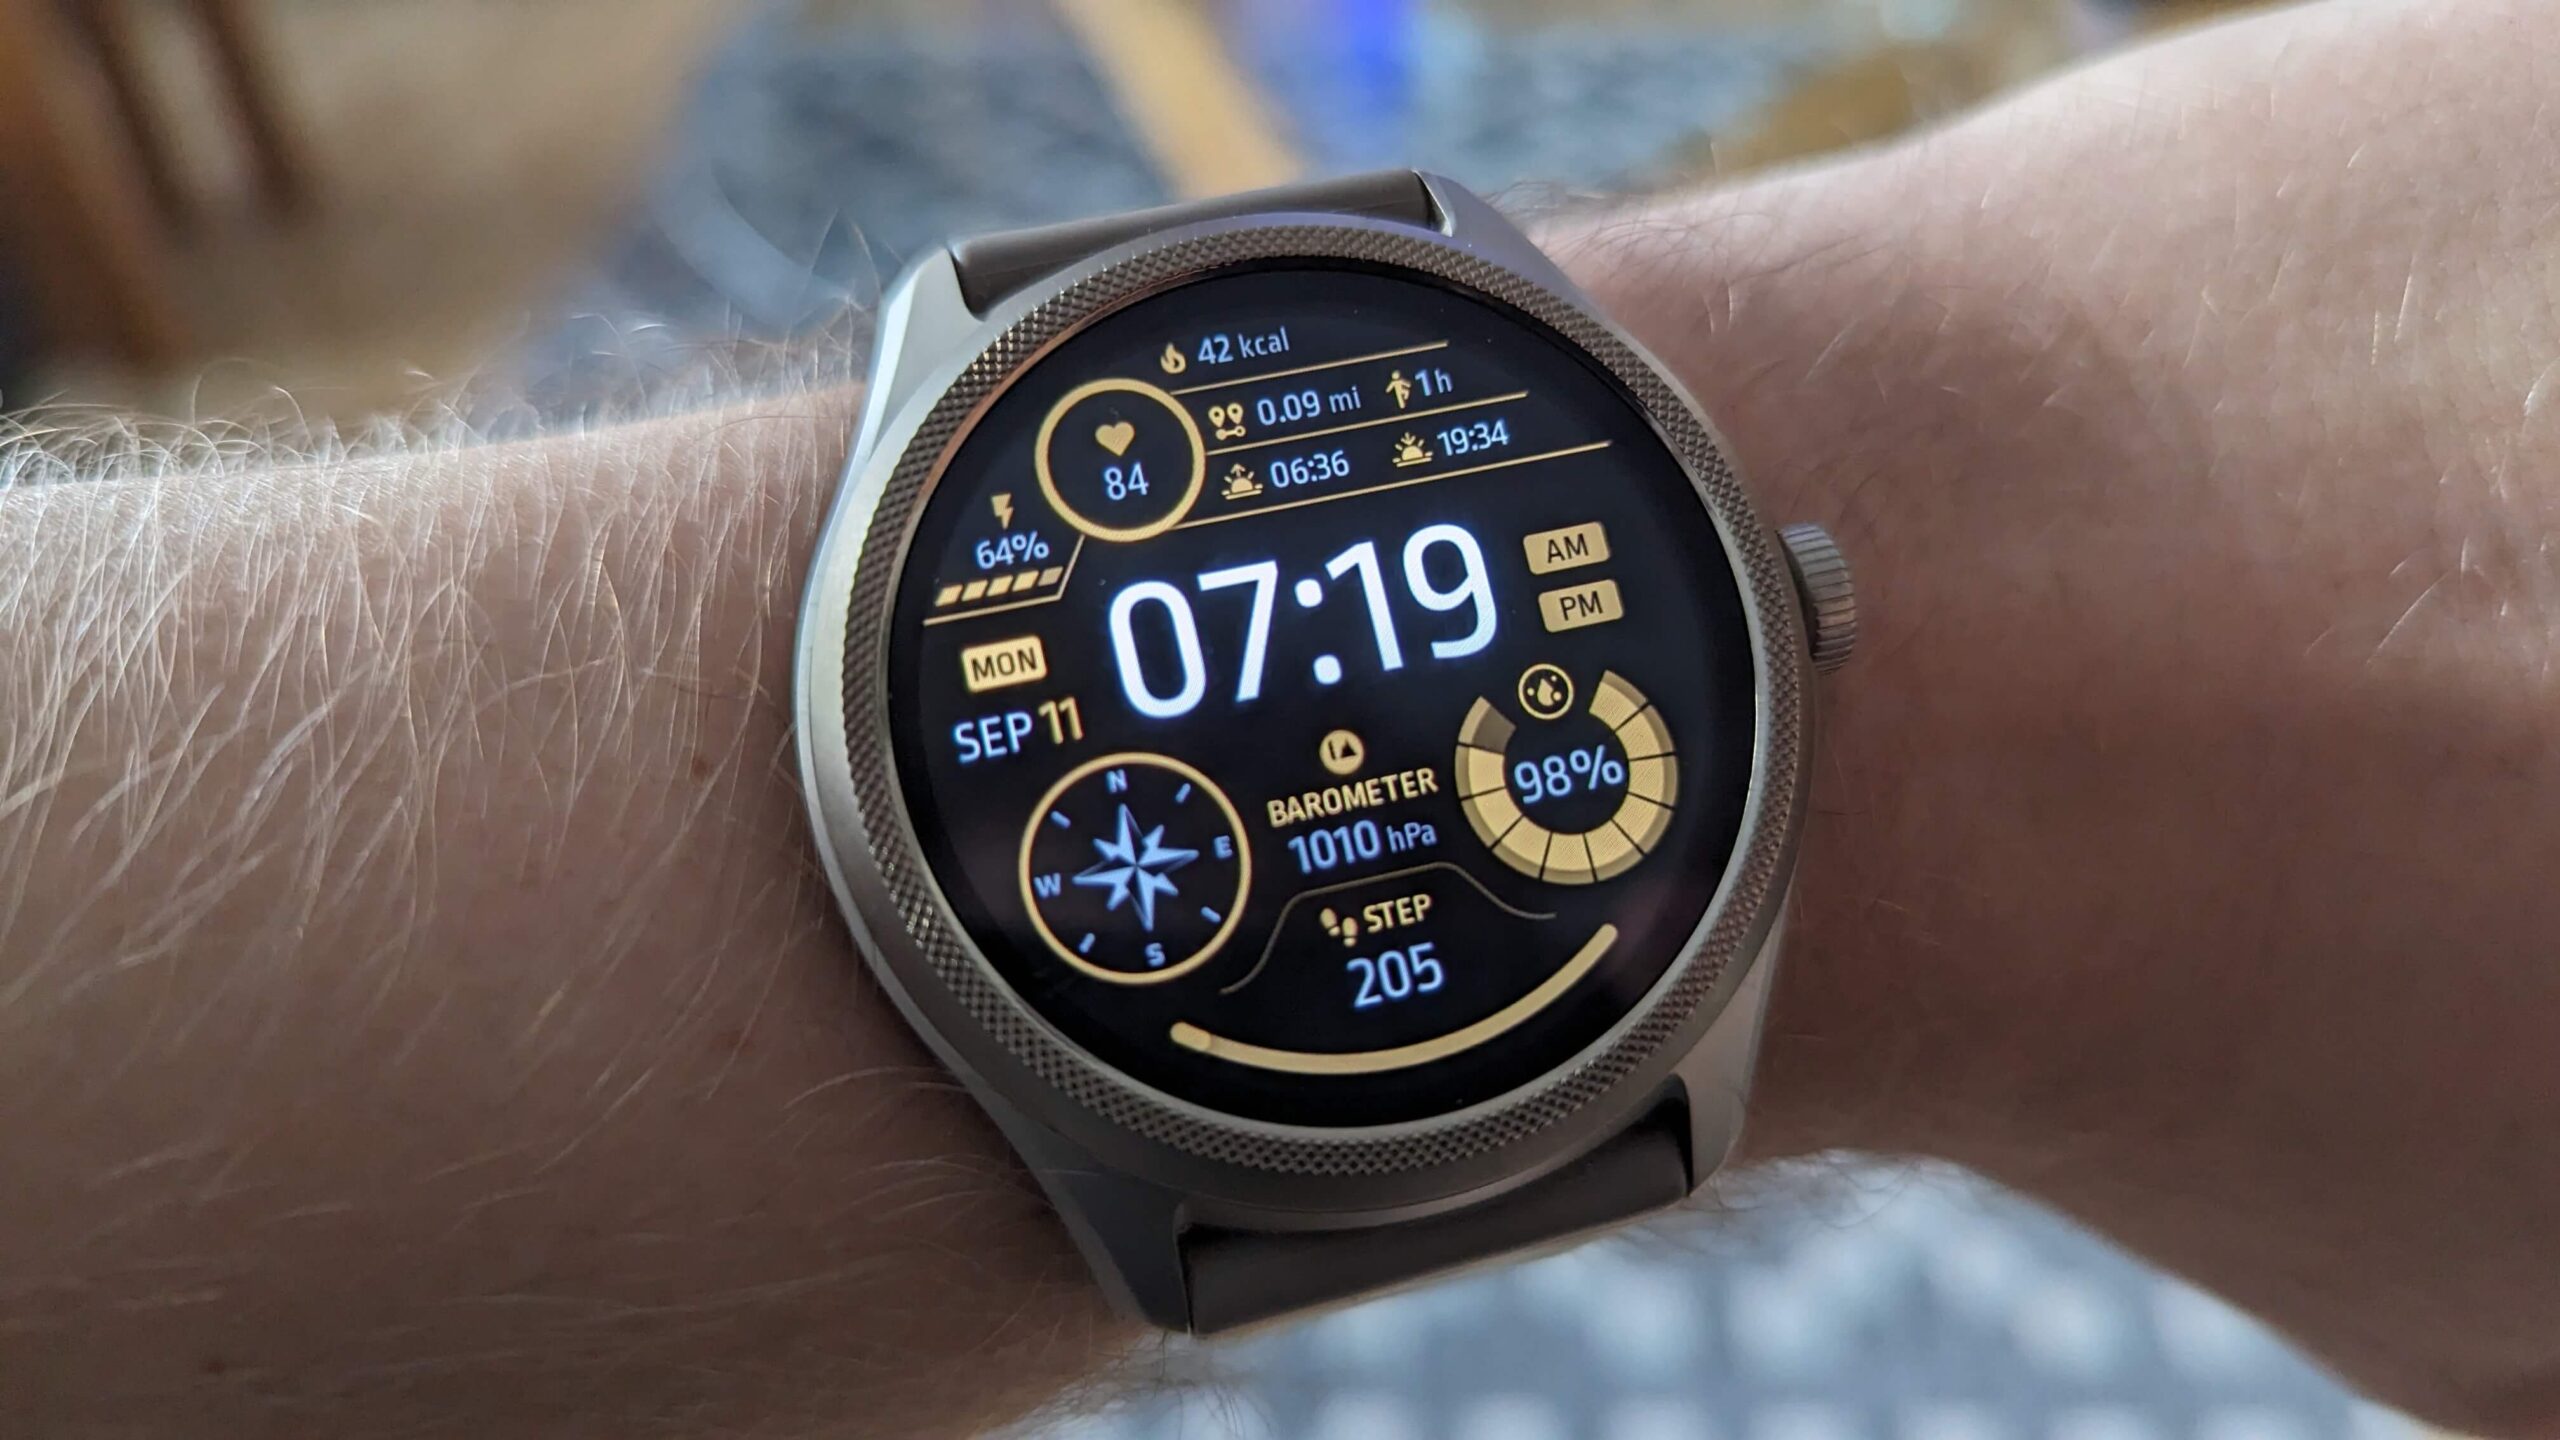 5 Things I Noticed Daily Driving The TicWatch Pro 5